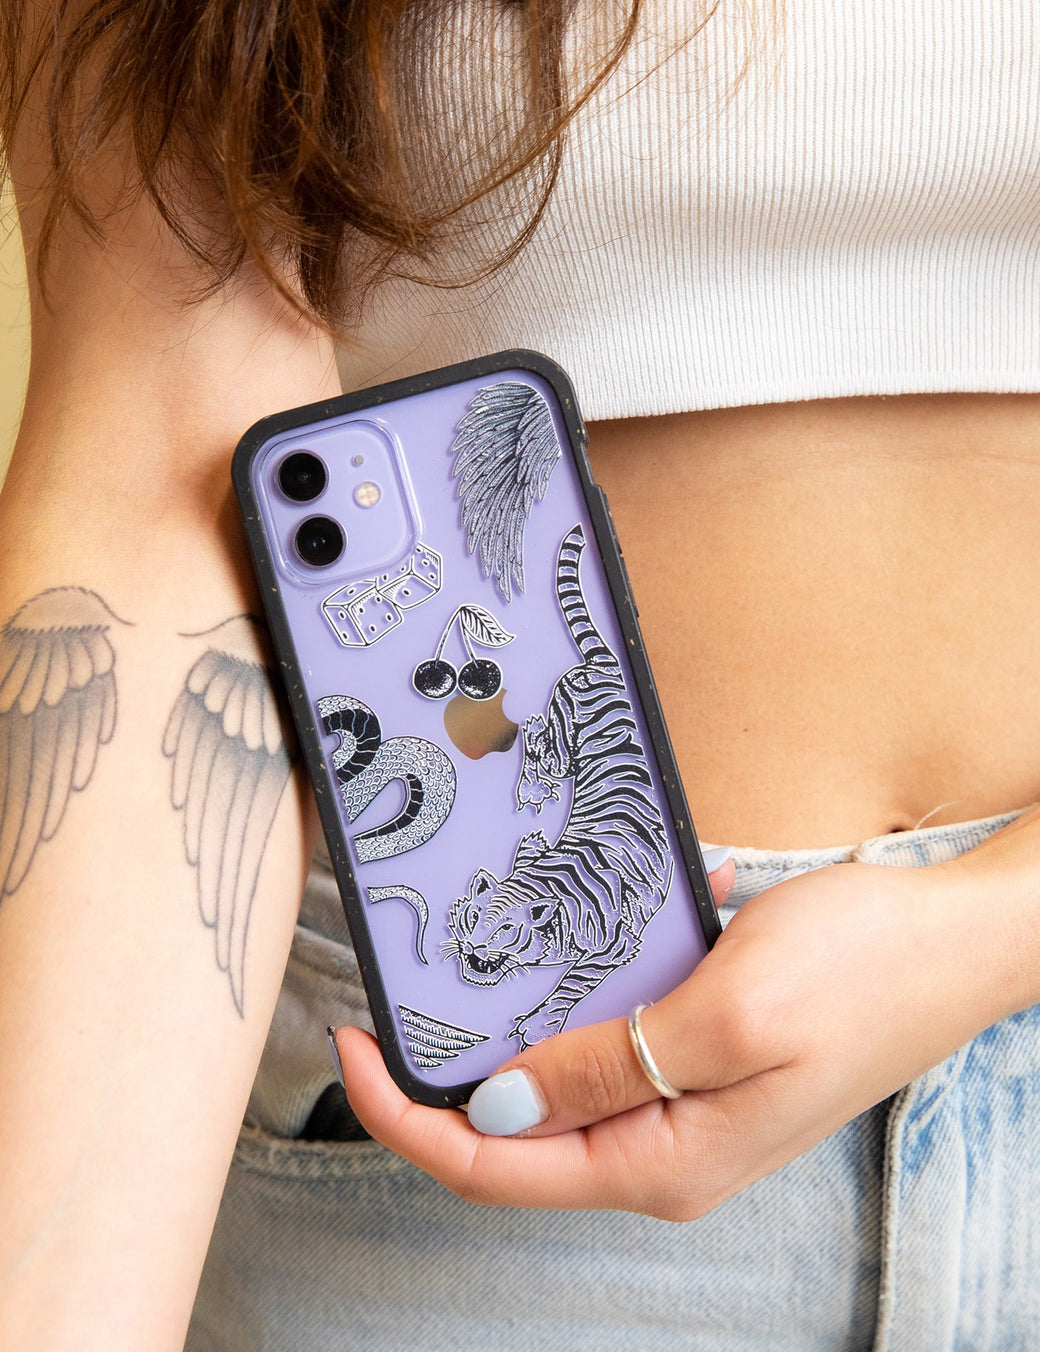 Clear Tiger Luck iPhone 11 Pro Case With Black Ridge